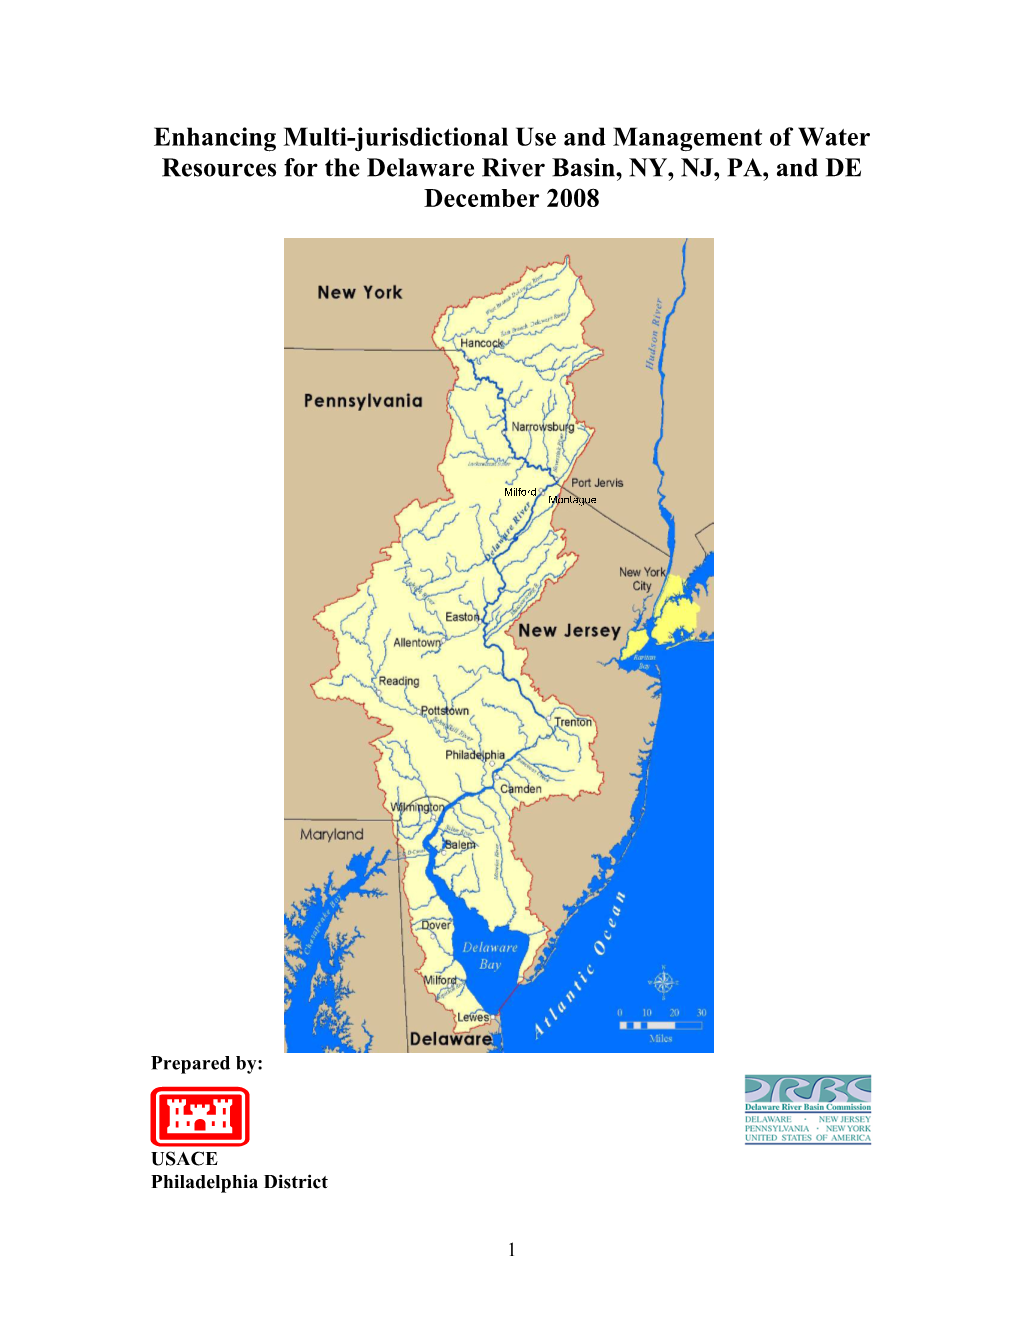 Enhancing Multi-Jurisdictional Use and Management of Water Resources for the Delaware River Basin, NY, NJ, PA, and DE December 2008